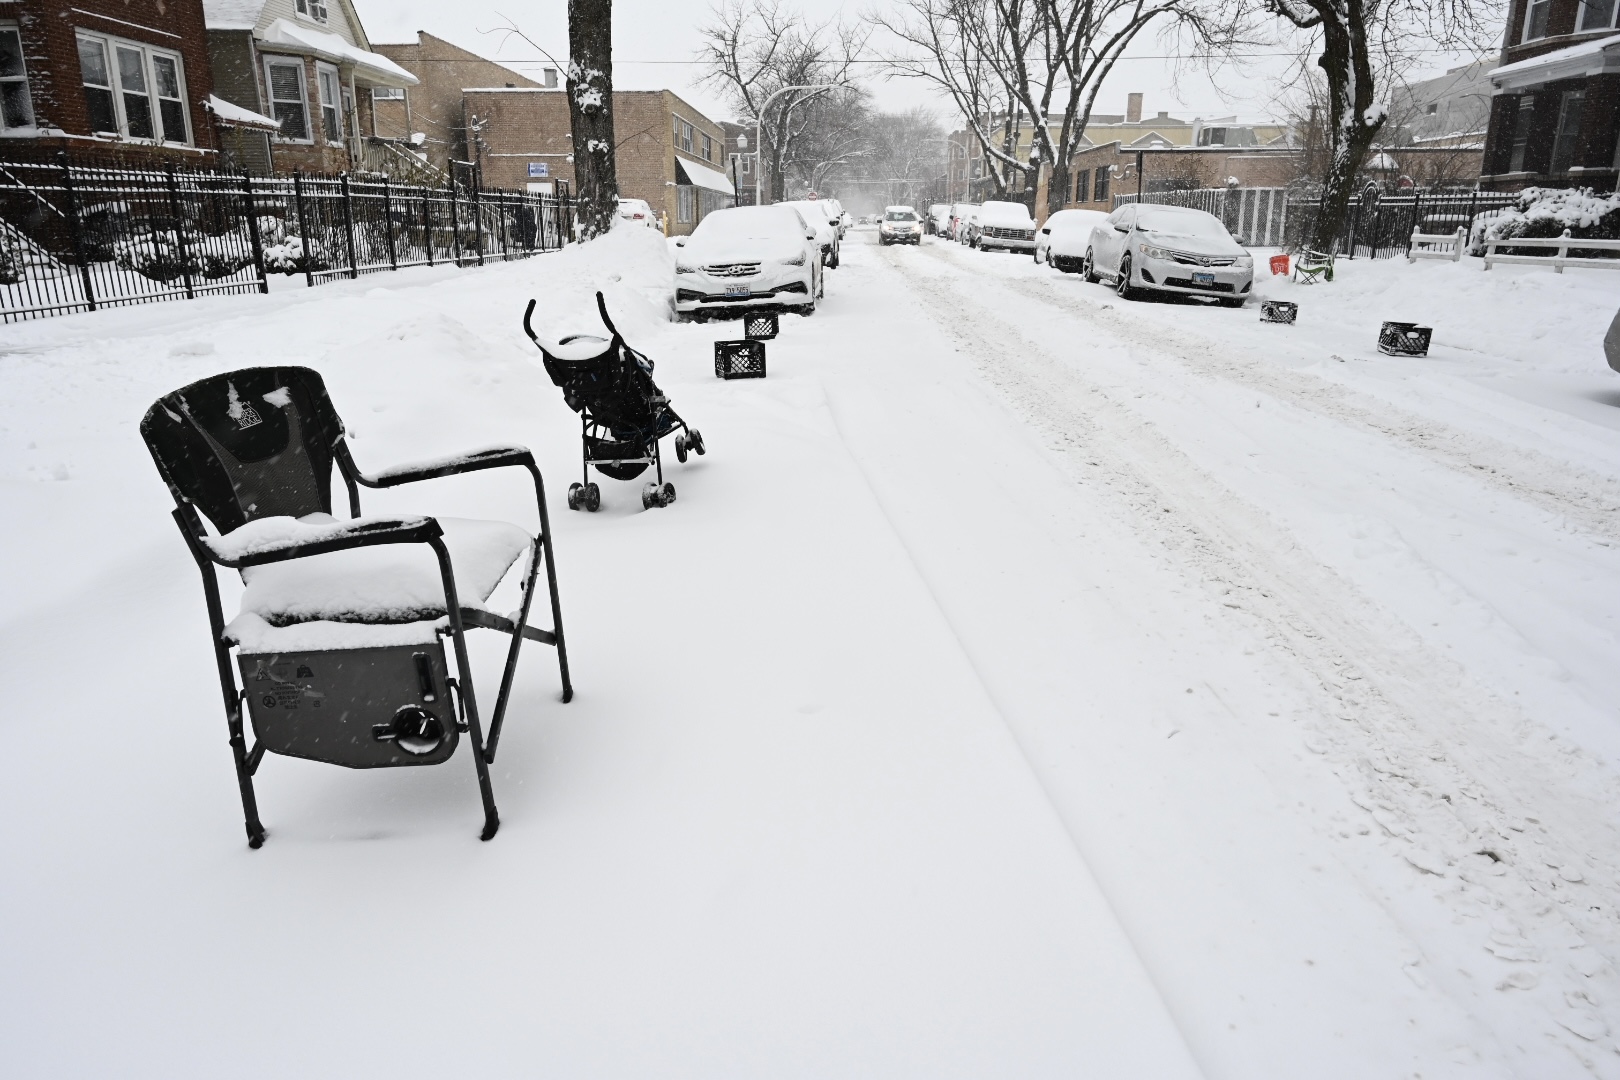 Chicago Winter Storm Dumps 9+ Inches On Parts Of The City Snow So Far